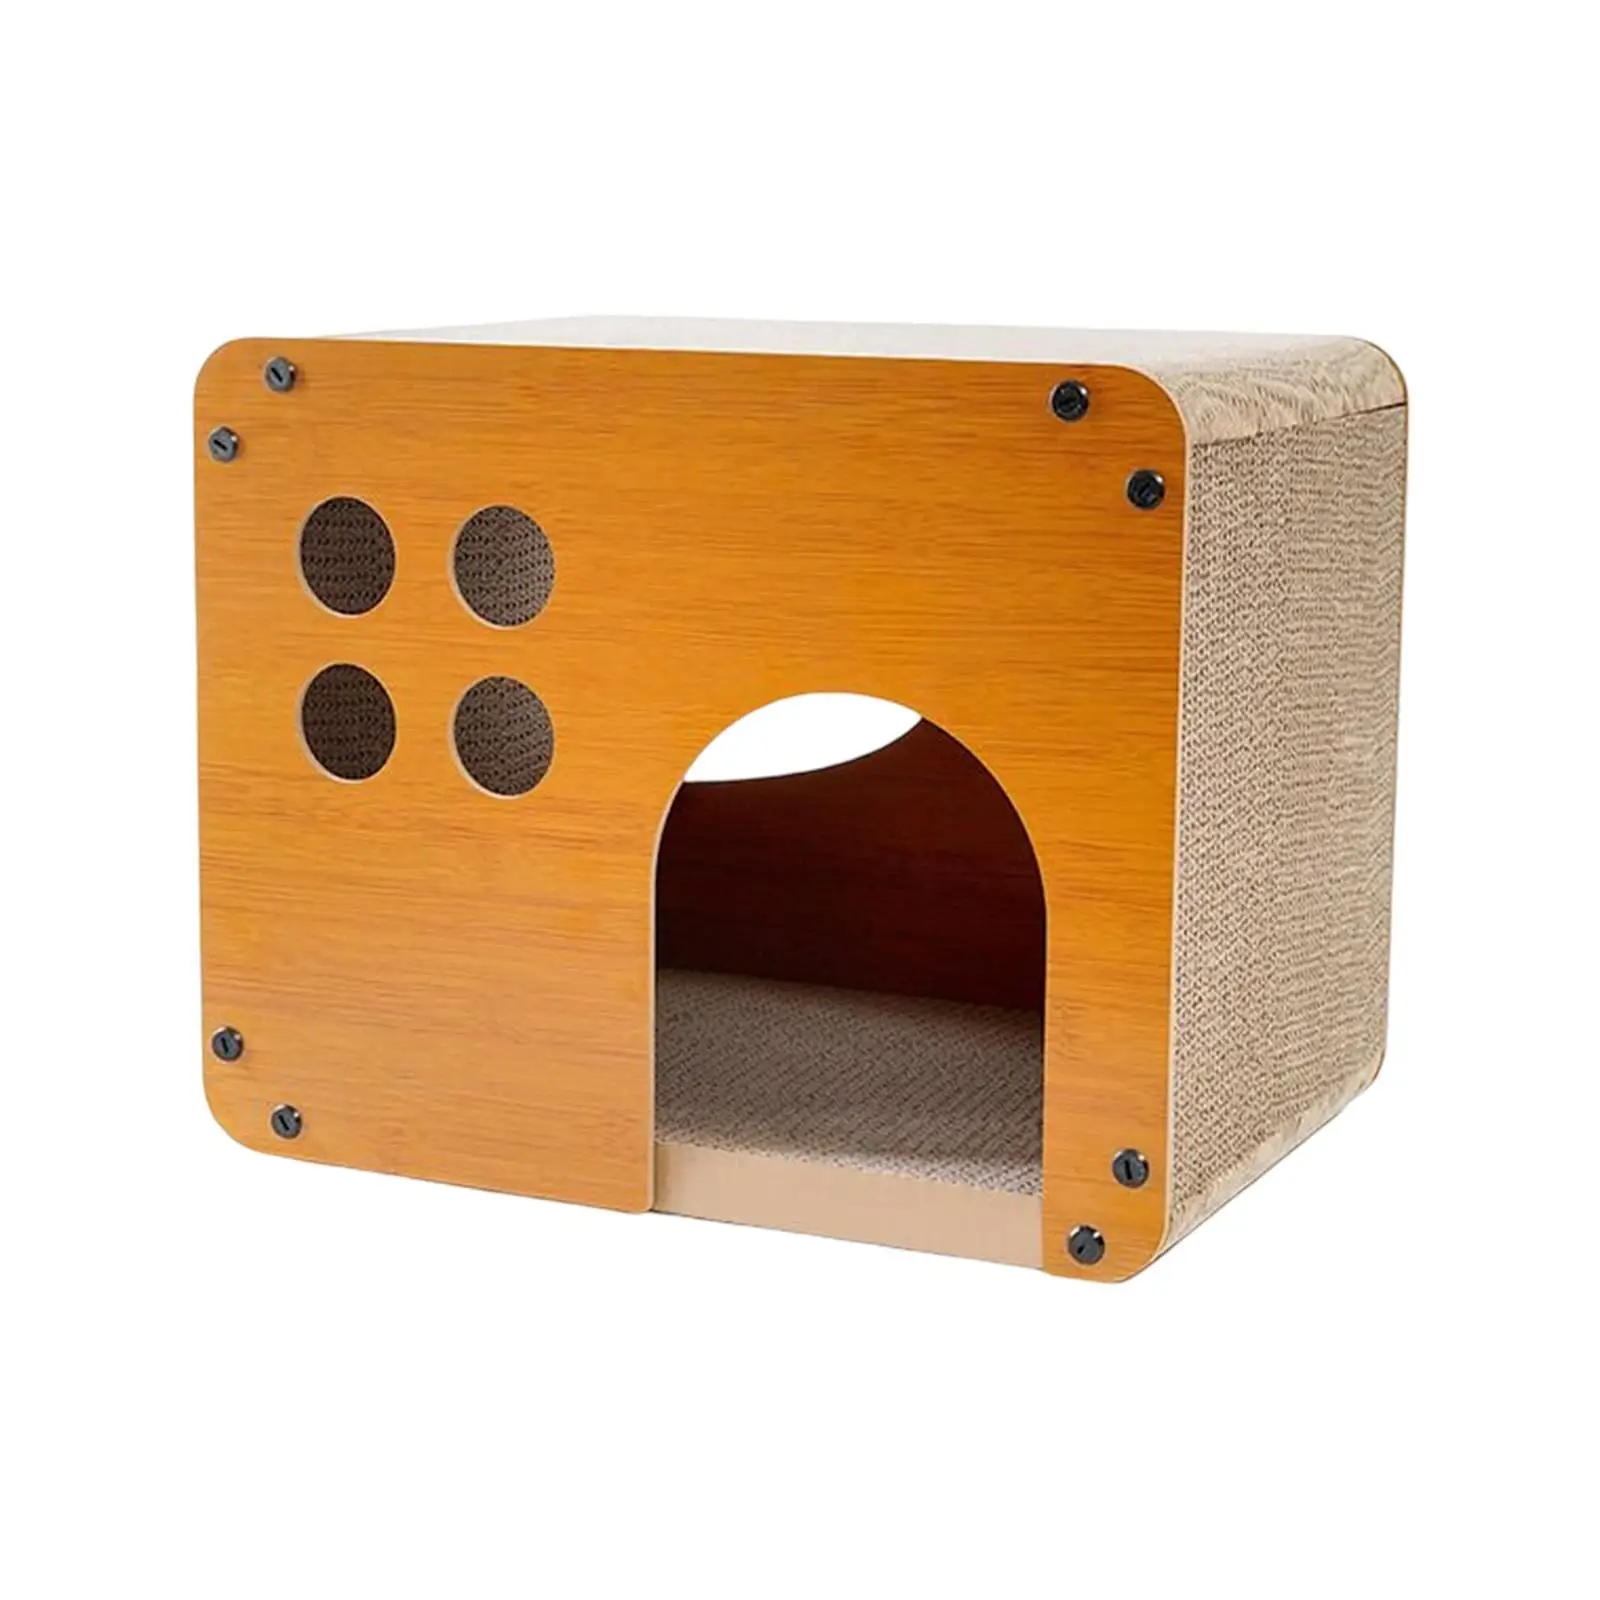 Pets Cave Corrugated Cardboard Breathable Compact Furniture Cat Dog Wood House Sleeping Bed for Puppy Indoor Cats Kitten Rabbits